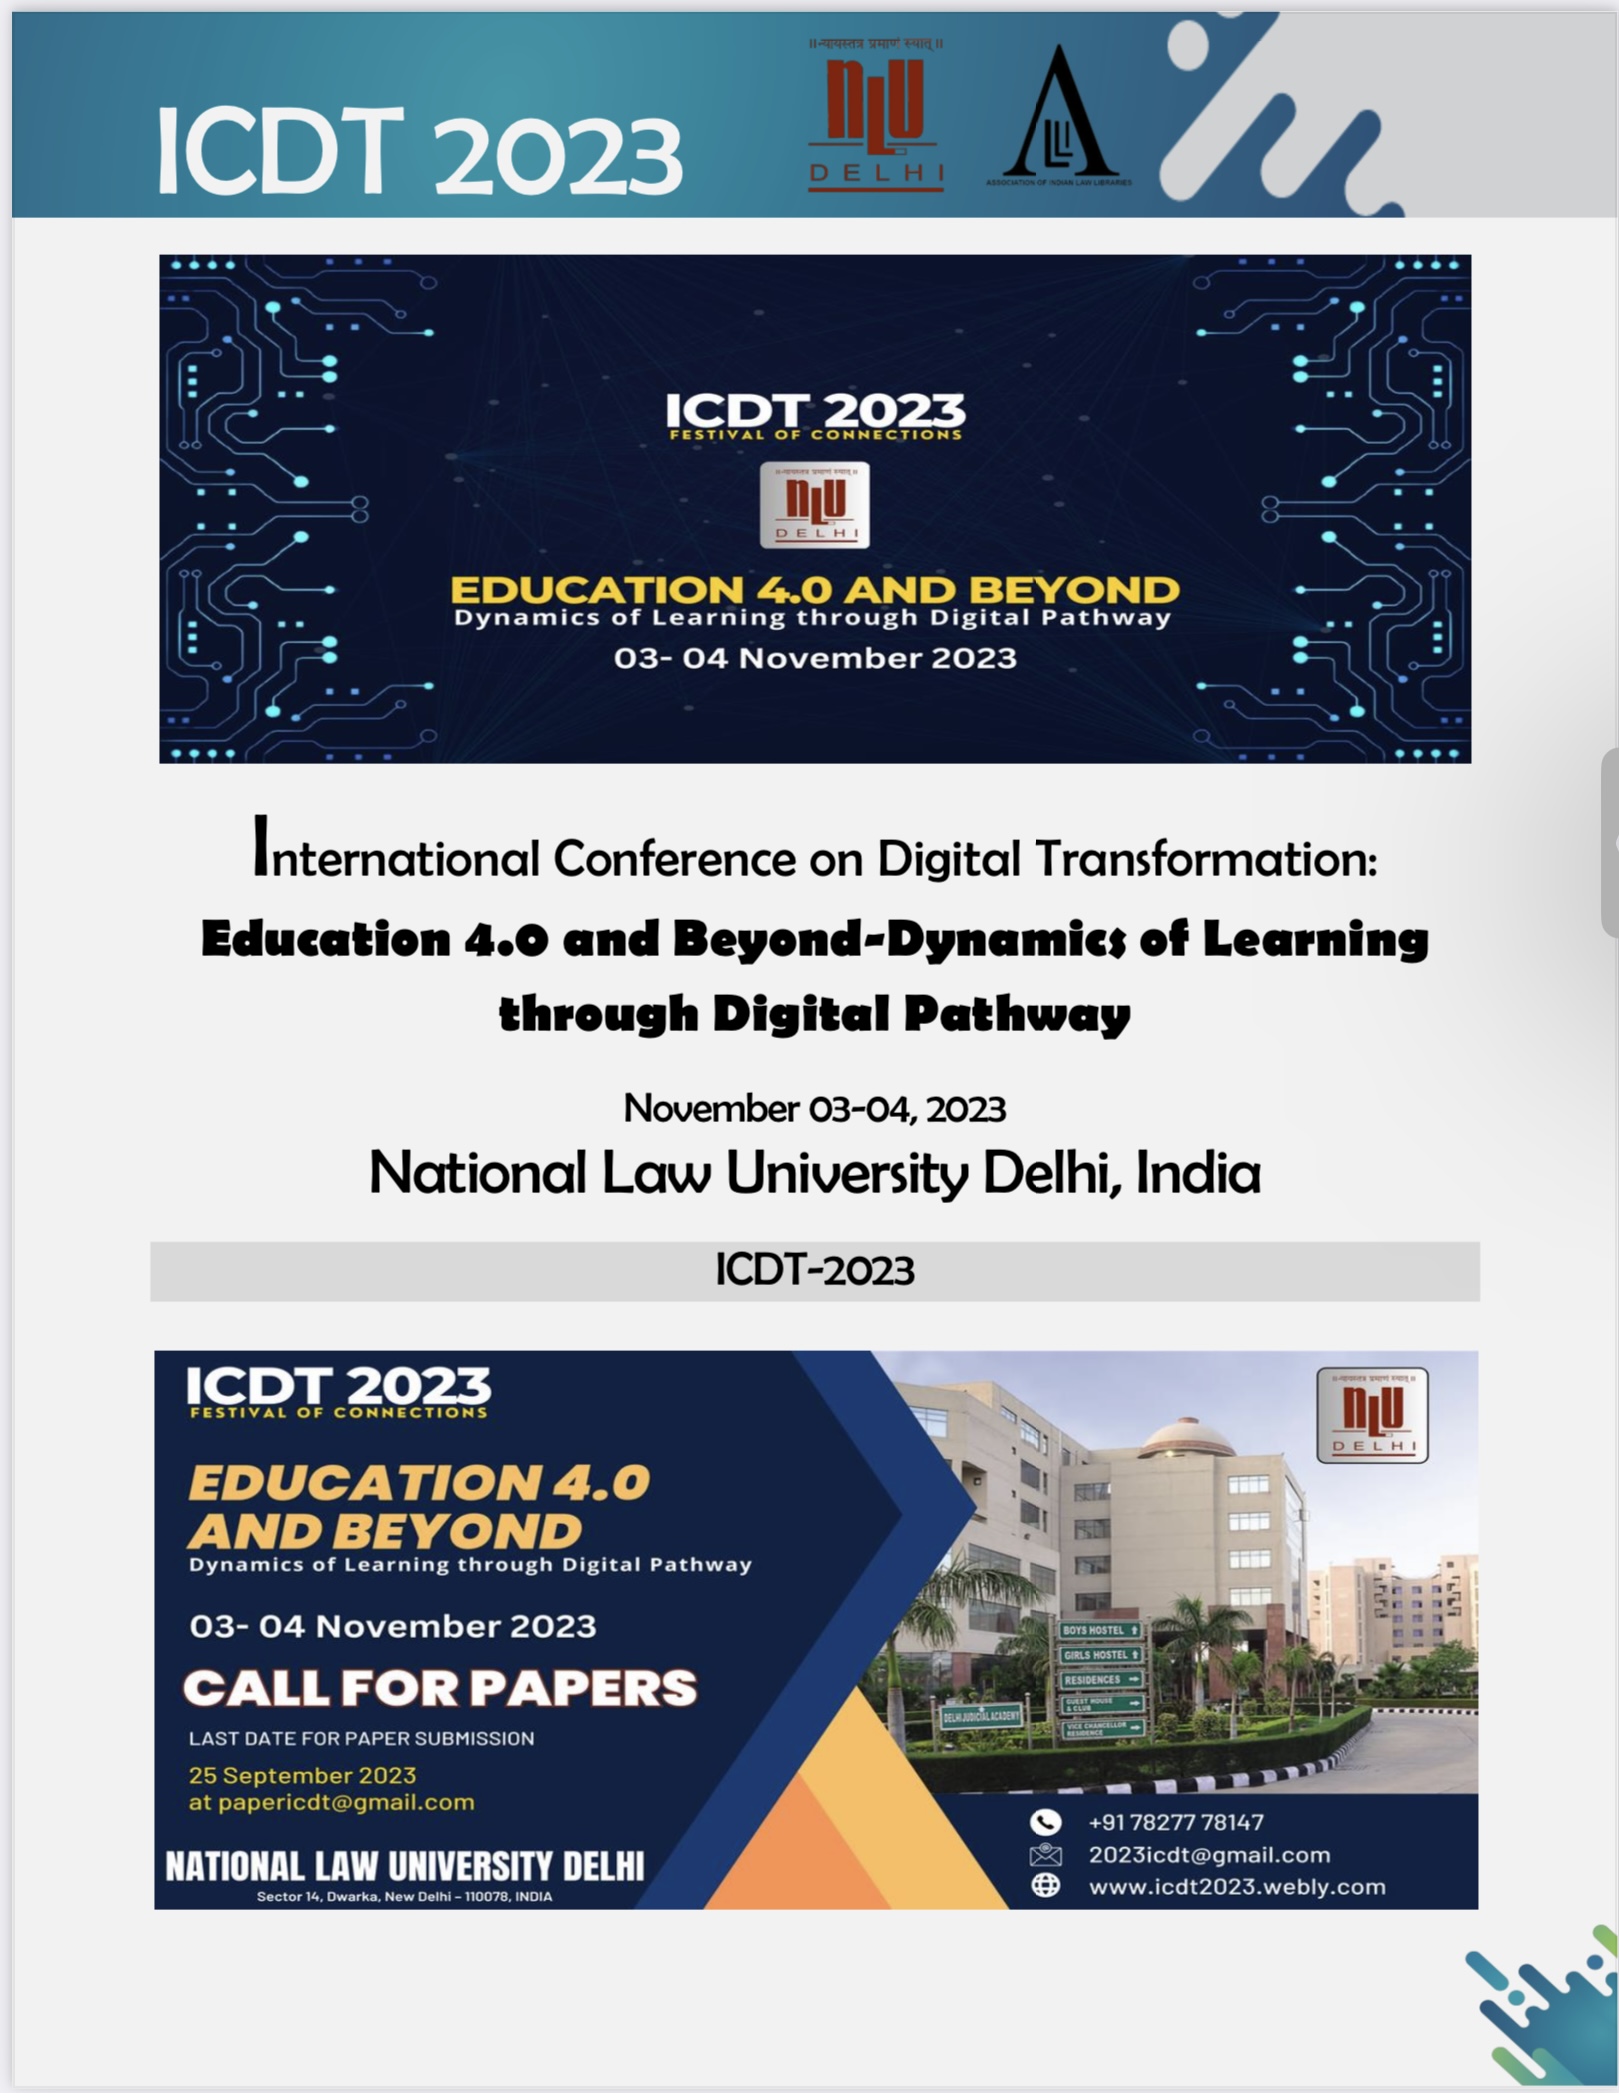 International Conference on Digital Transformation: Education 4.0 and Beyond-Dynamics of Learning through Digital Pathway (November 03-04, 2023) NLU Delhi, India (ICDT-2023)